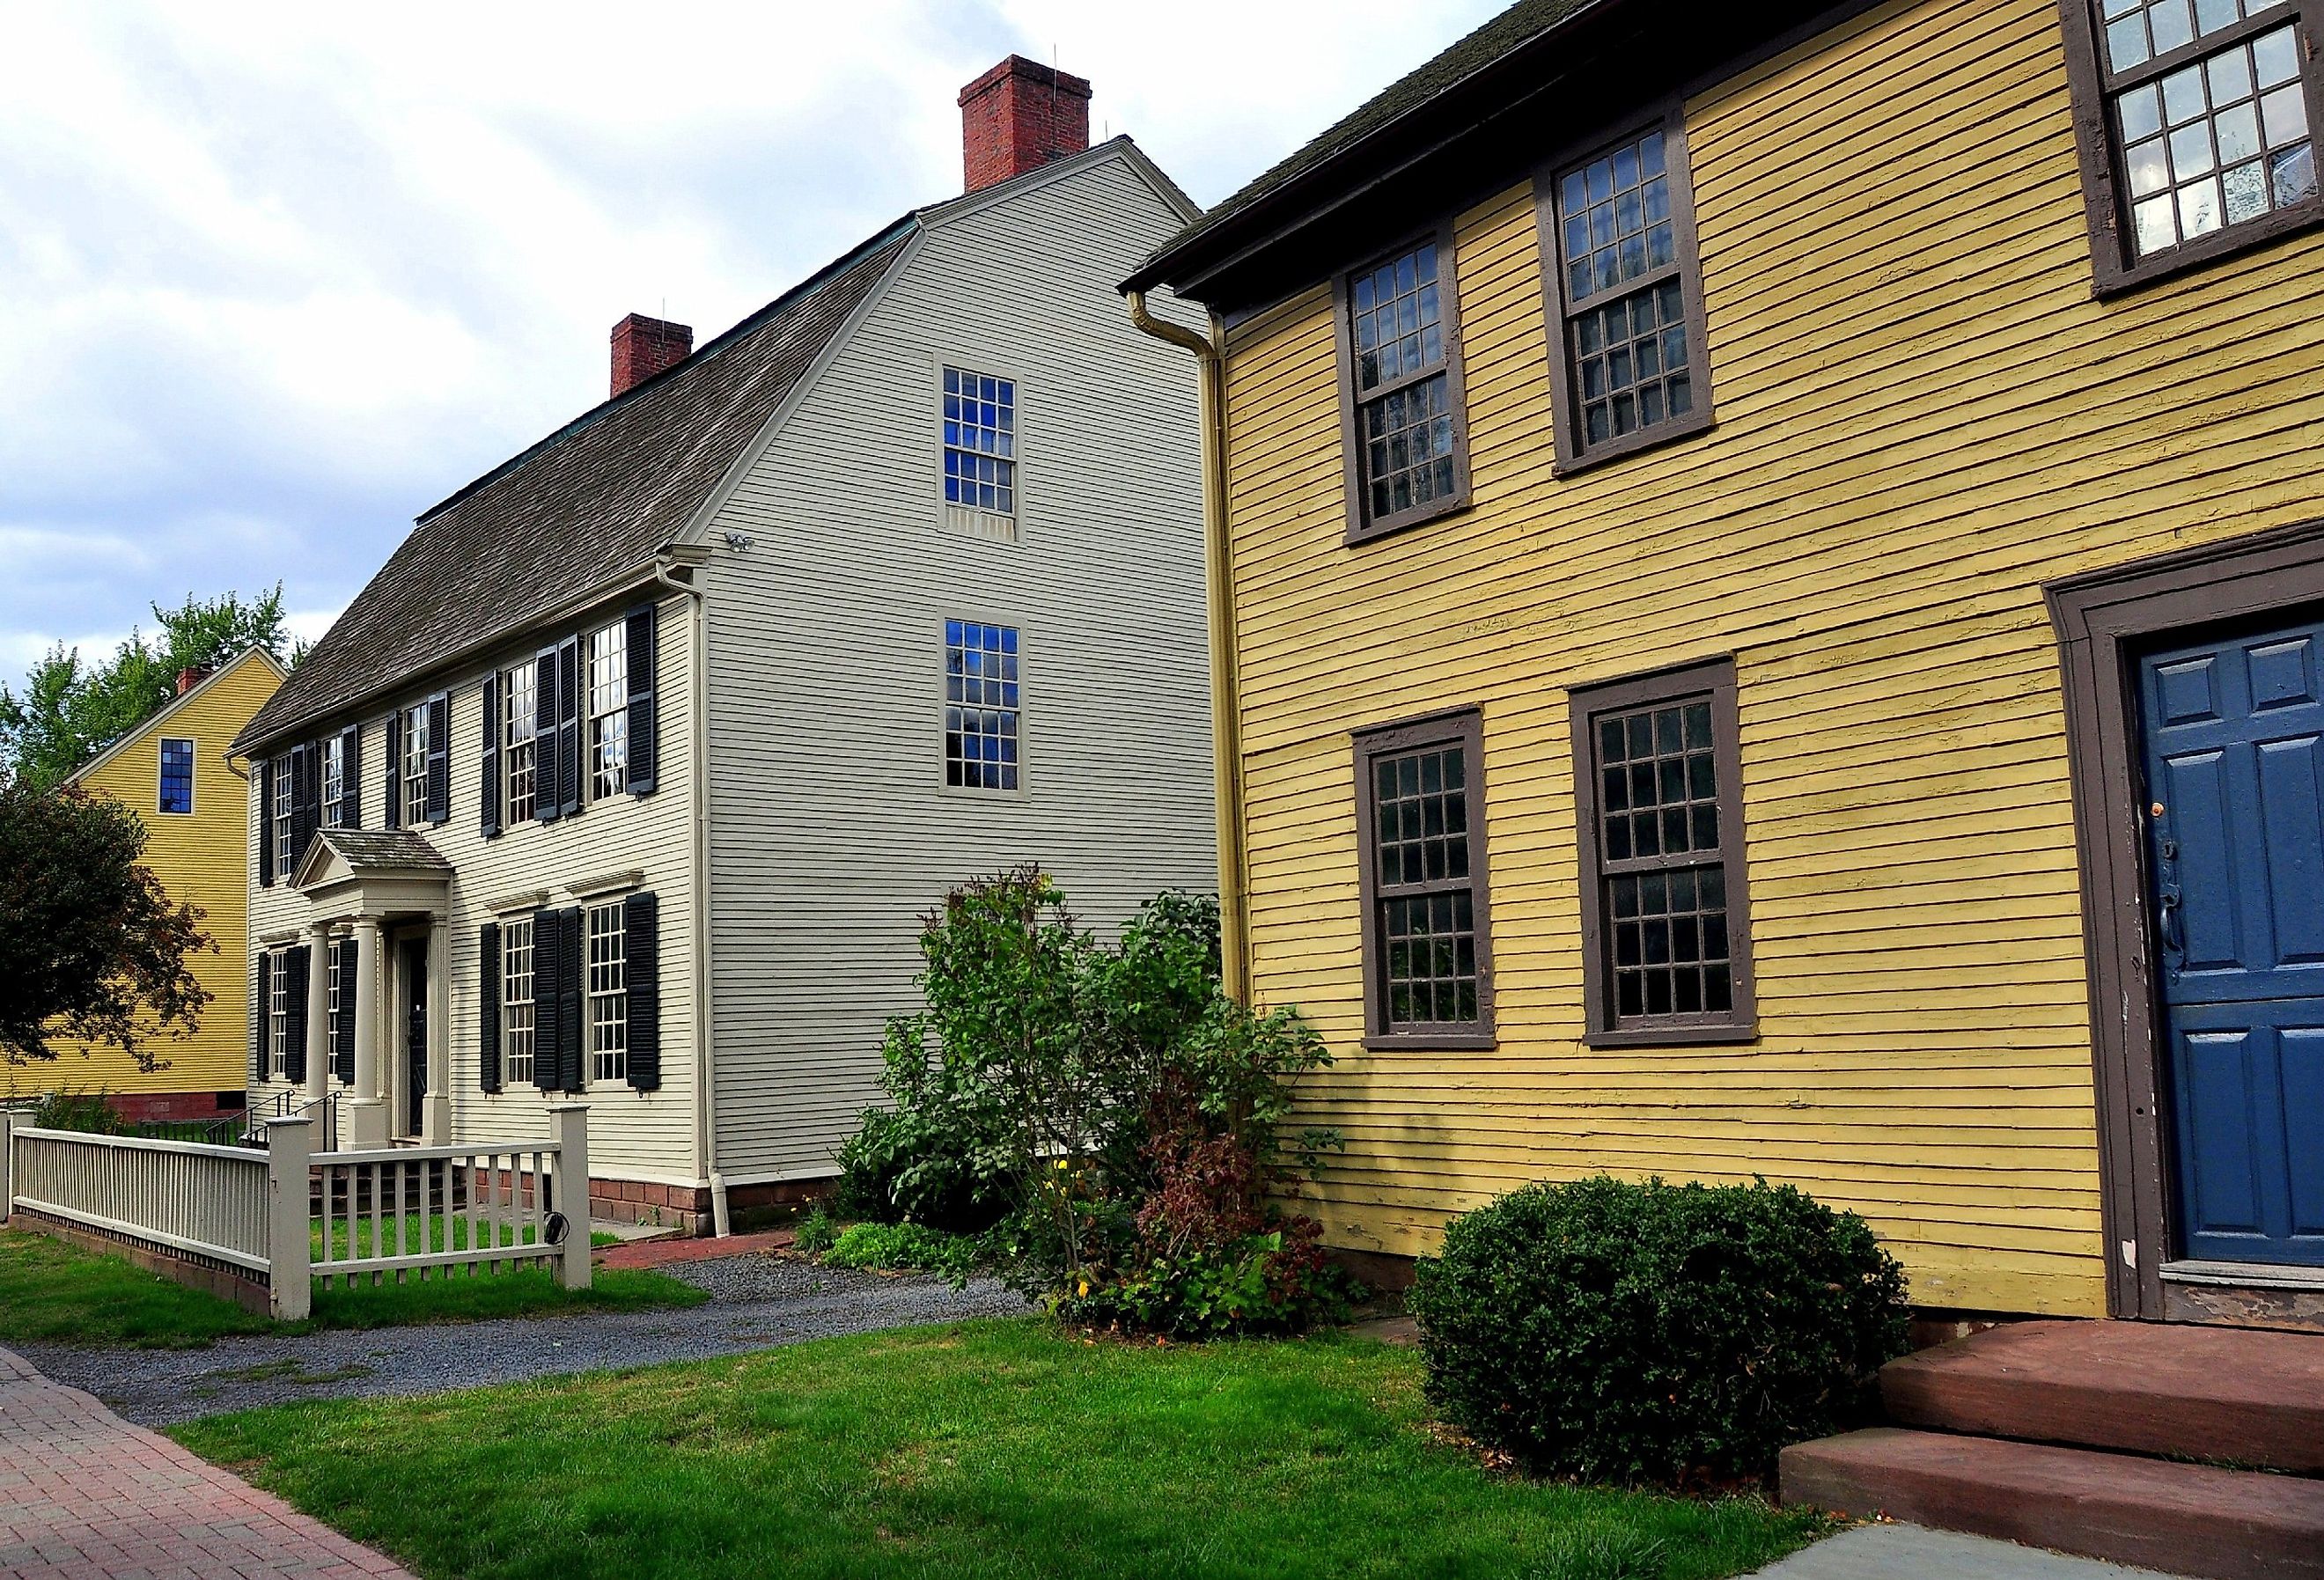 The Silas Deane House, the Joseph Webb House, and the Isaac Stevens House (left to right), Wethersfield, Connecticut.